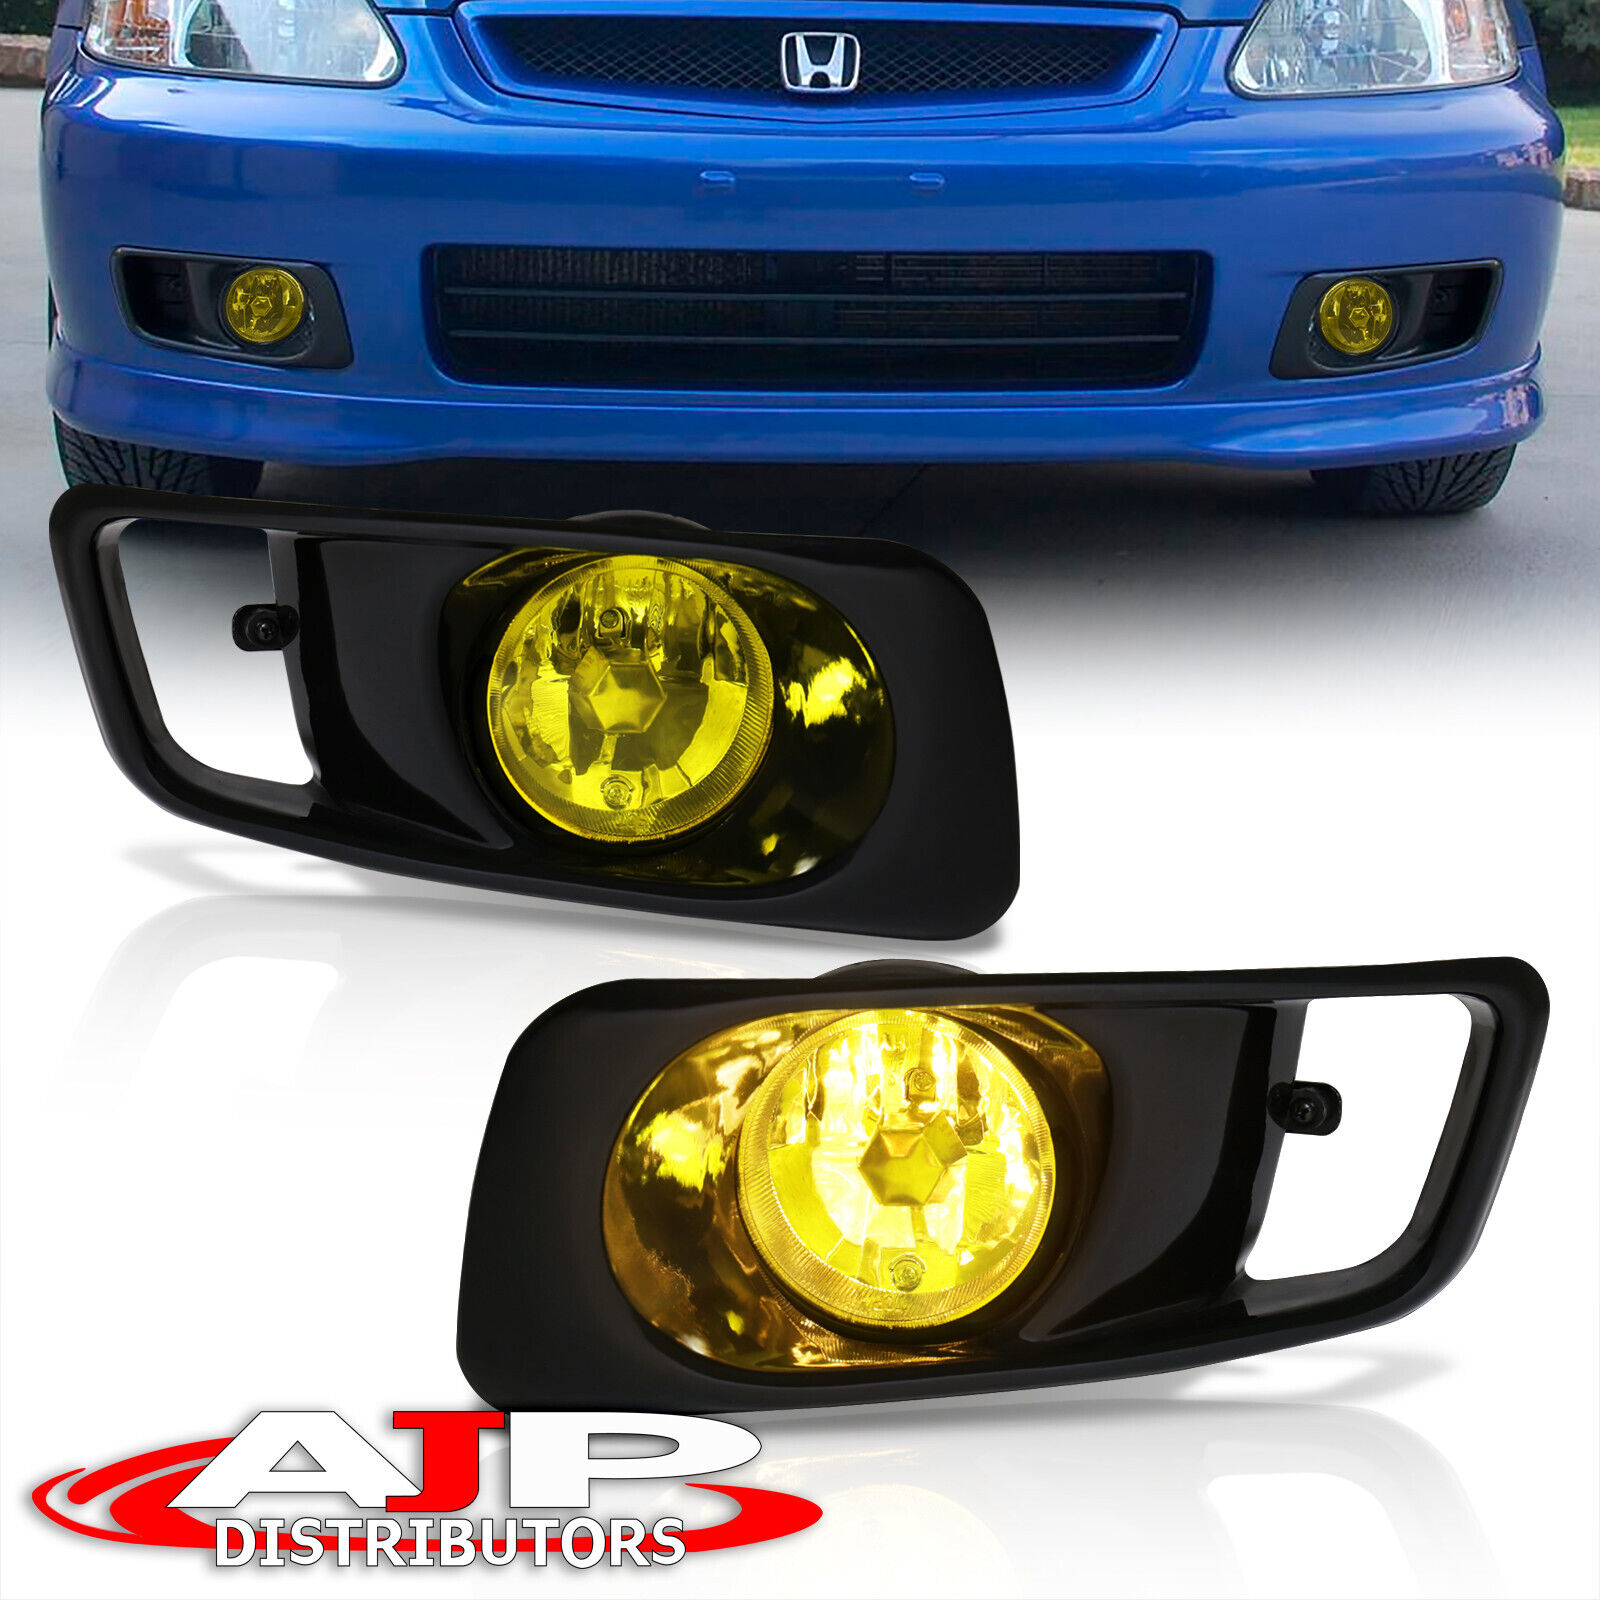 Amber Driving Bumper Fog Lights Lamps + Wiring Switch For 1999-2000 Honda Civic